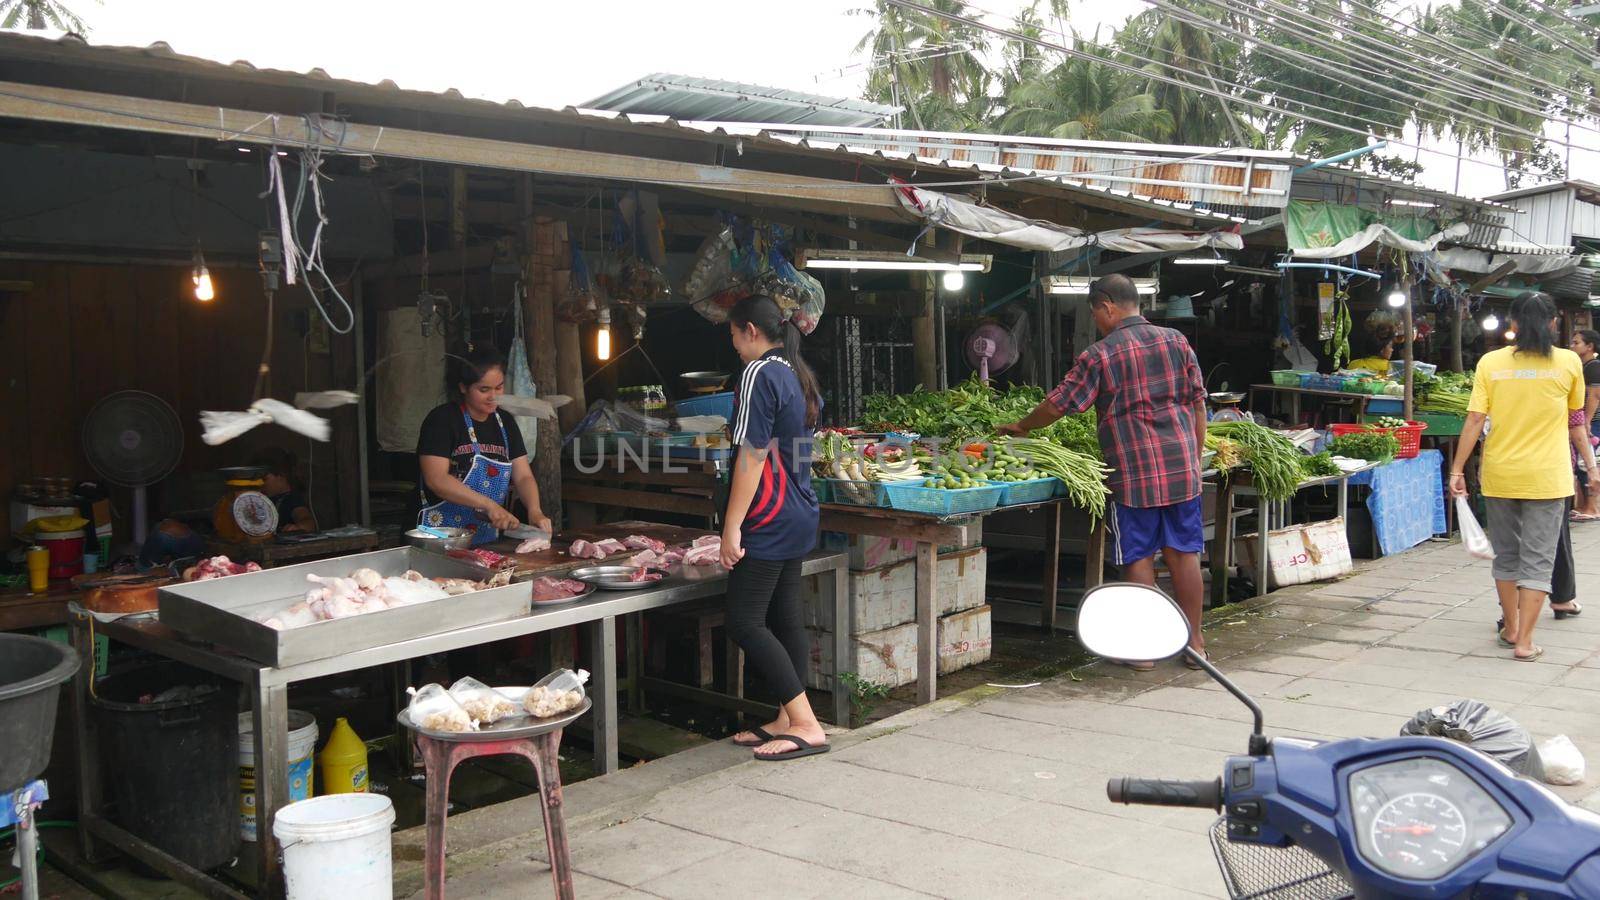 KOH SAMUI ISLAND, THAILAND - 10 JULY 2019: Food market for locals. Lively ranks with groceries. Typical daily life on the street in Asia. People go shopping for fruits vegetables, seafood and meat